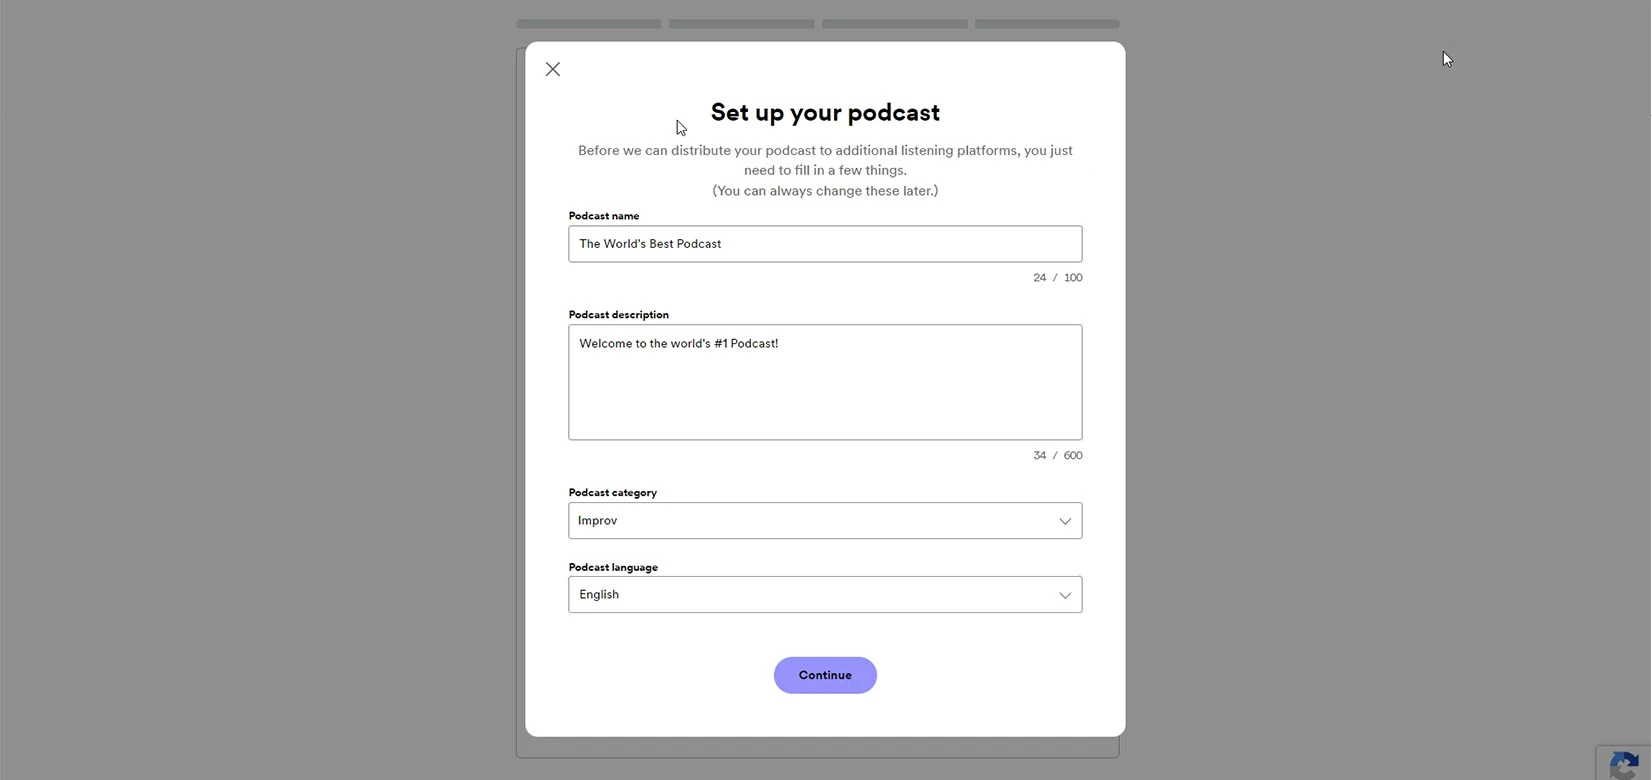 Set up your podcast